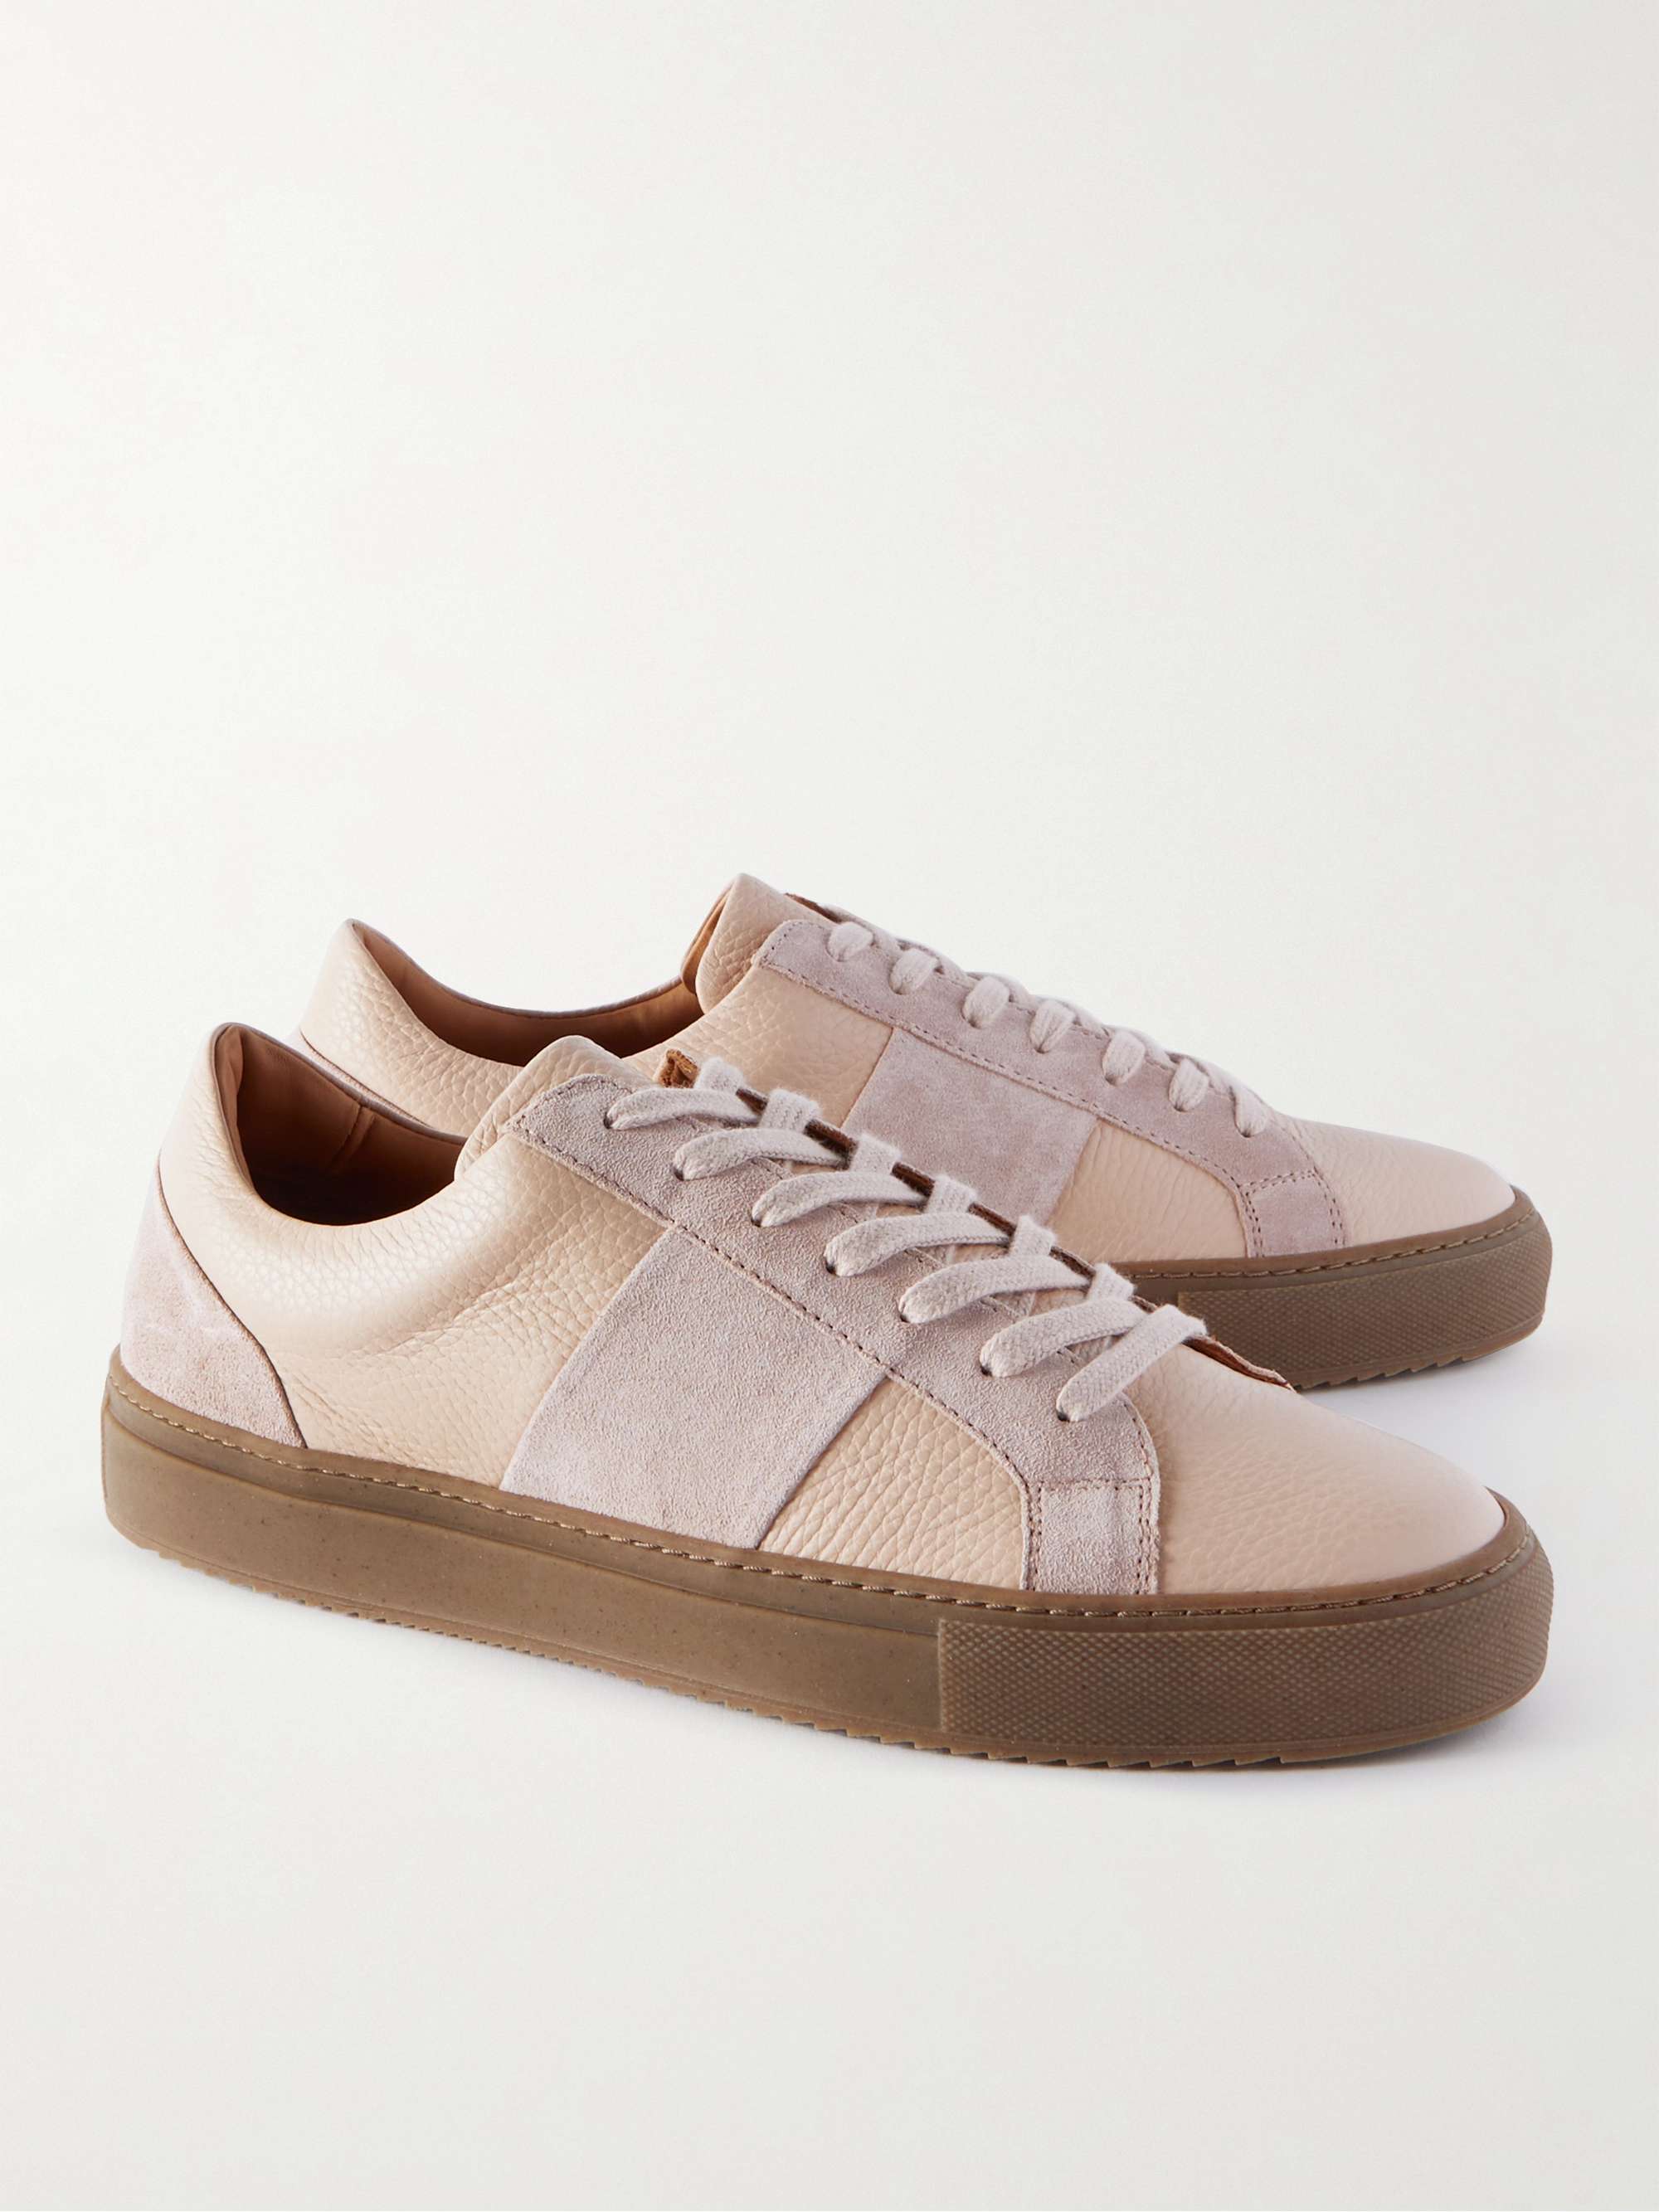 MR P. Larry Regenerated Suede by evolo® and Full-Grain Leather Sneakers